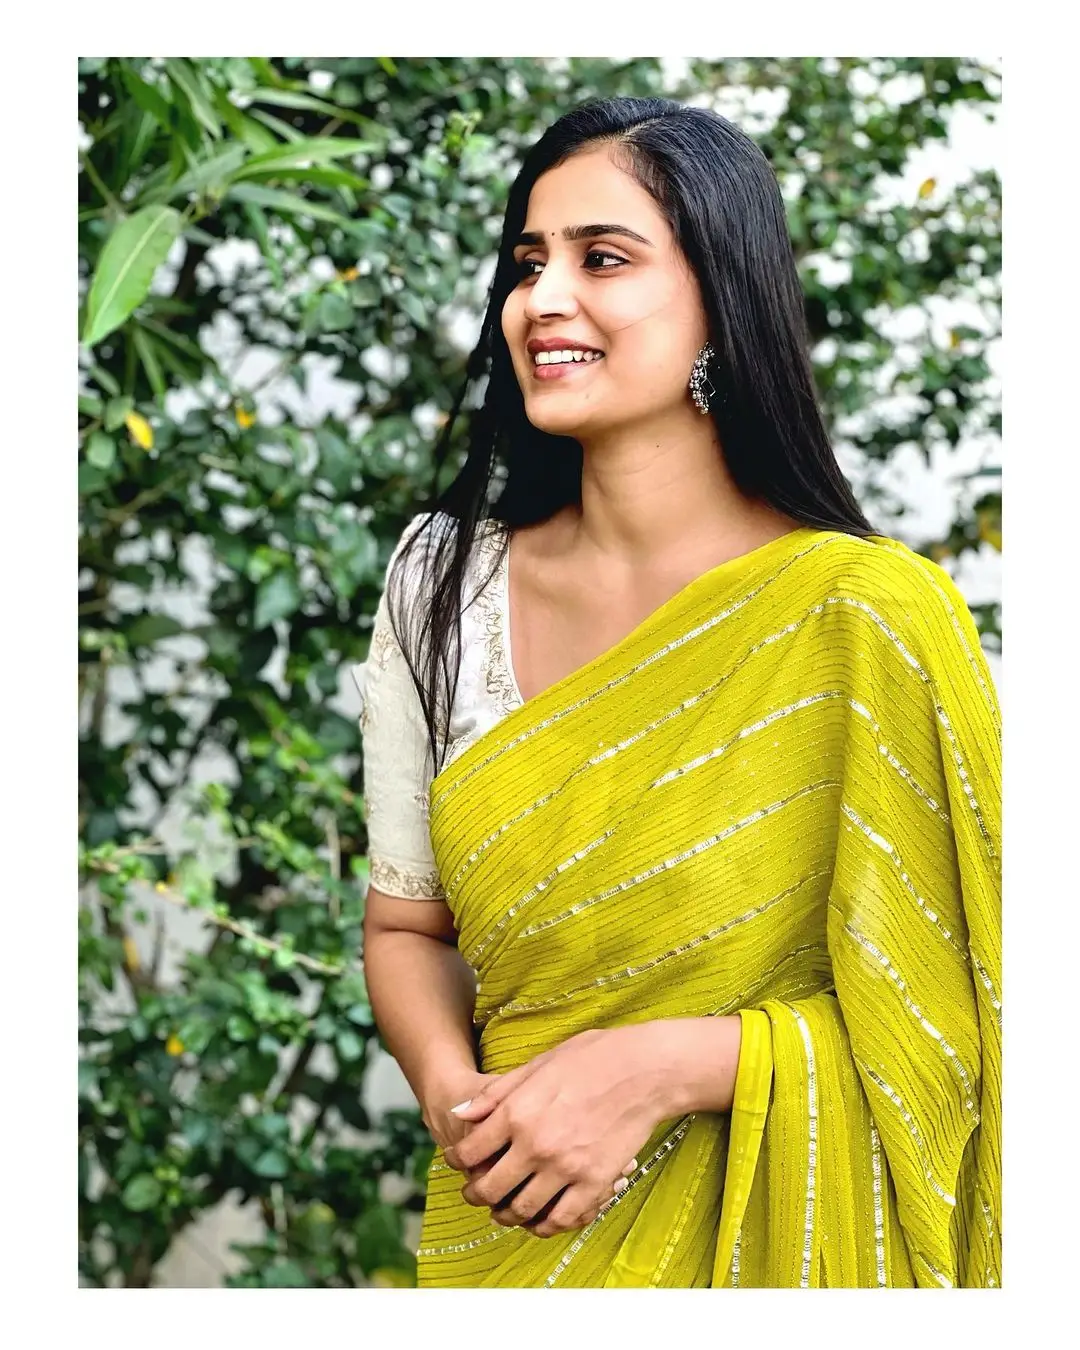 INDIAN GIRL KAVYA SHREE IN TRADITIONAL GREEN SAREE WHITE BLOUSE 2